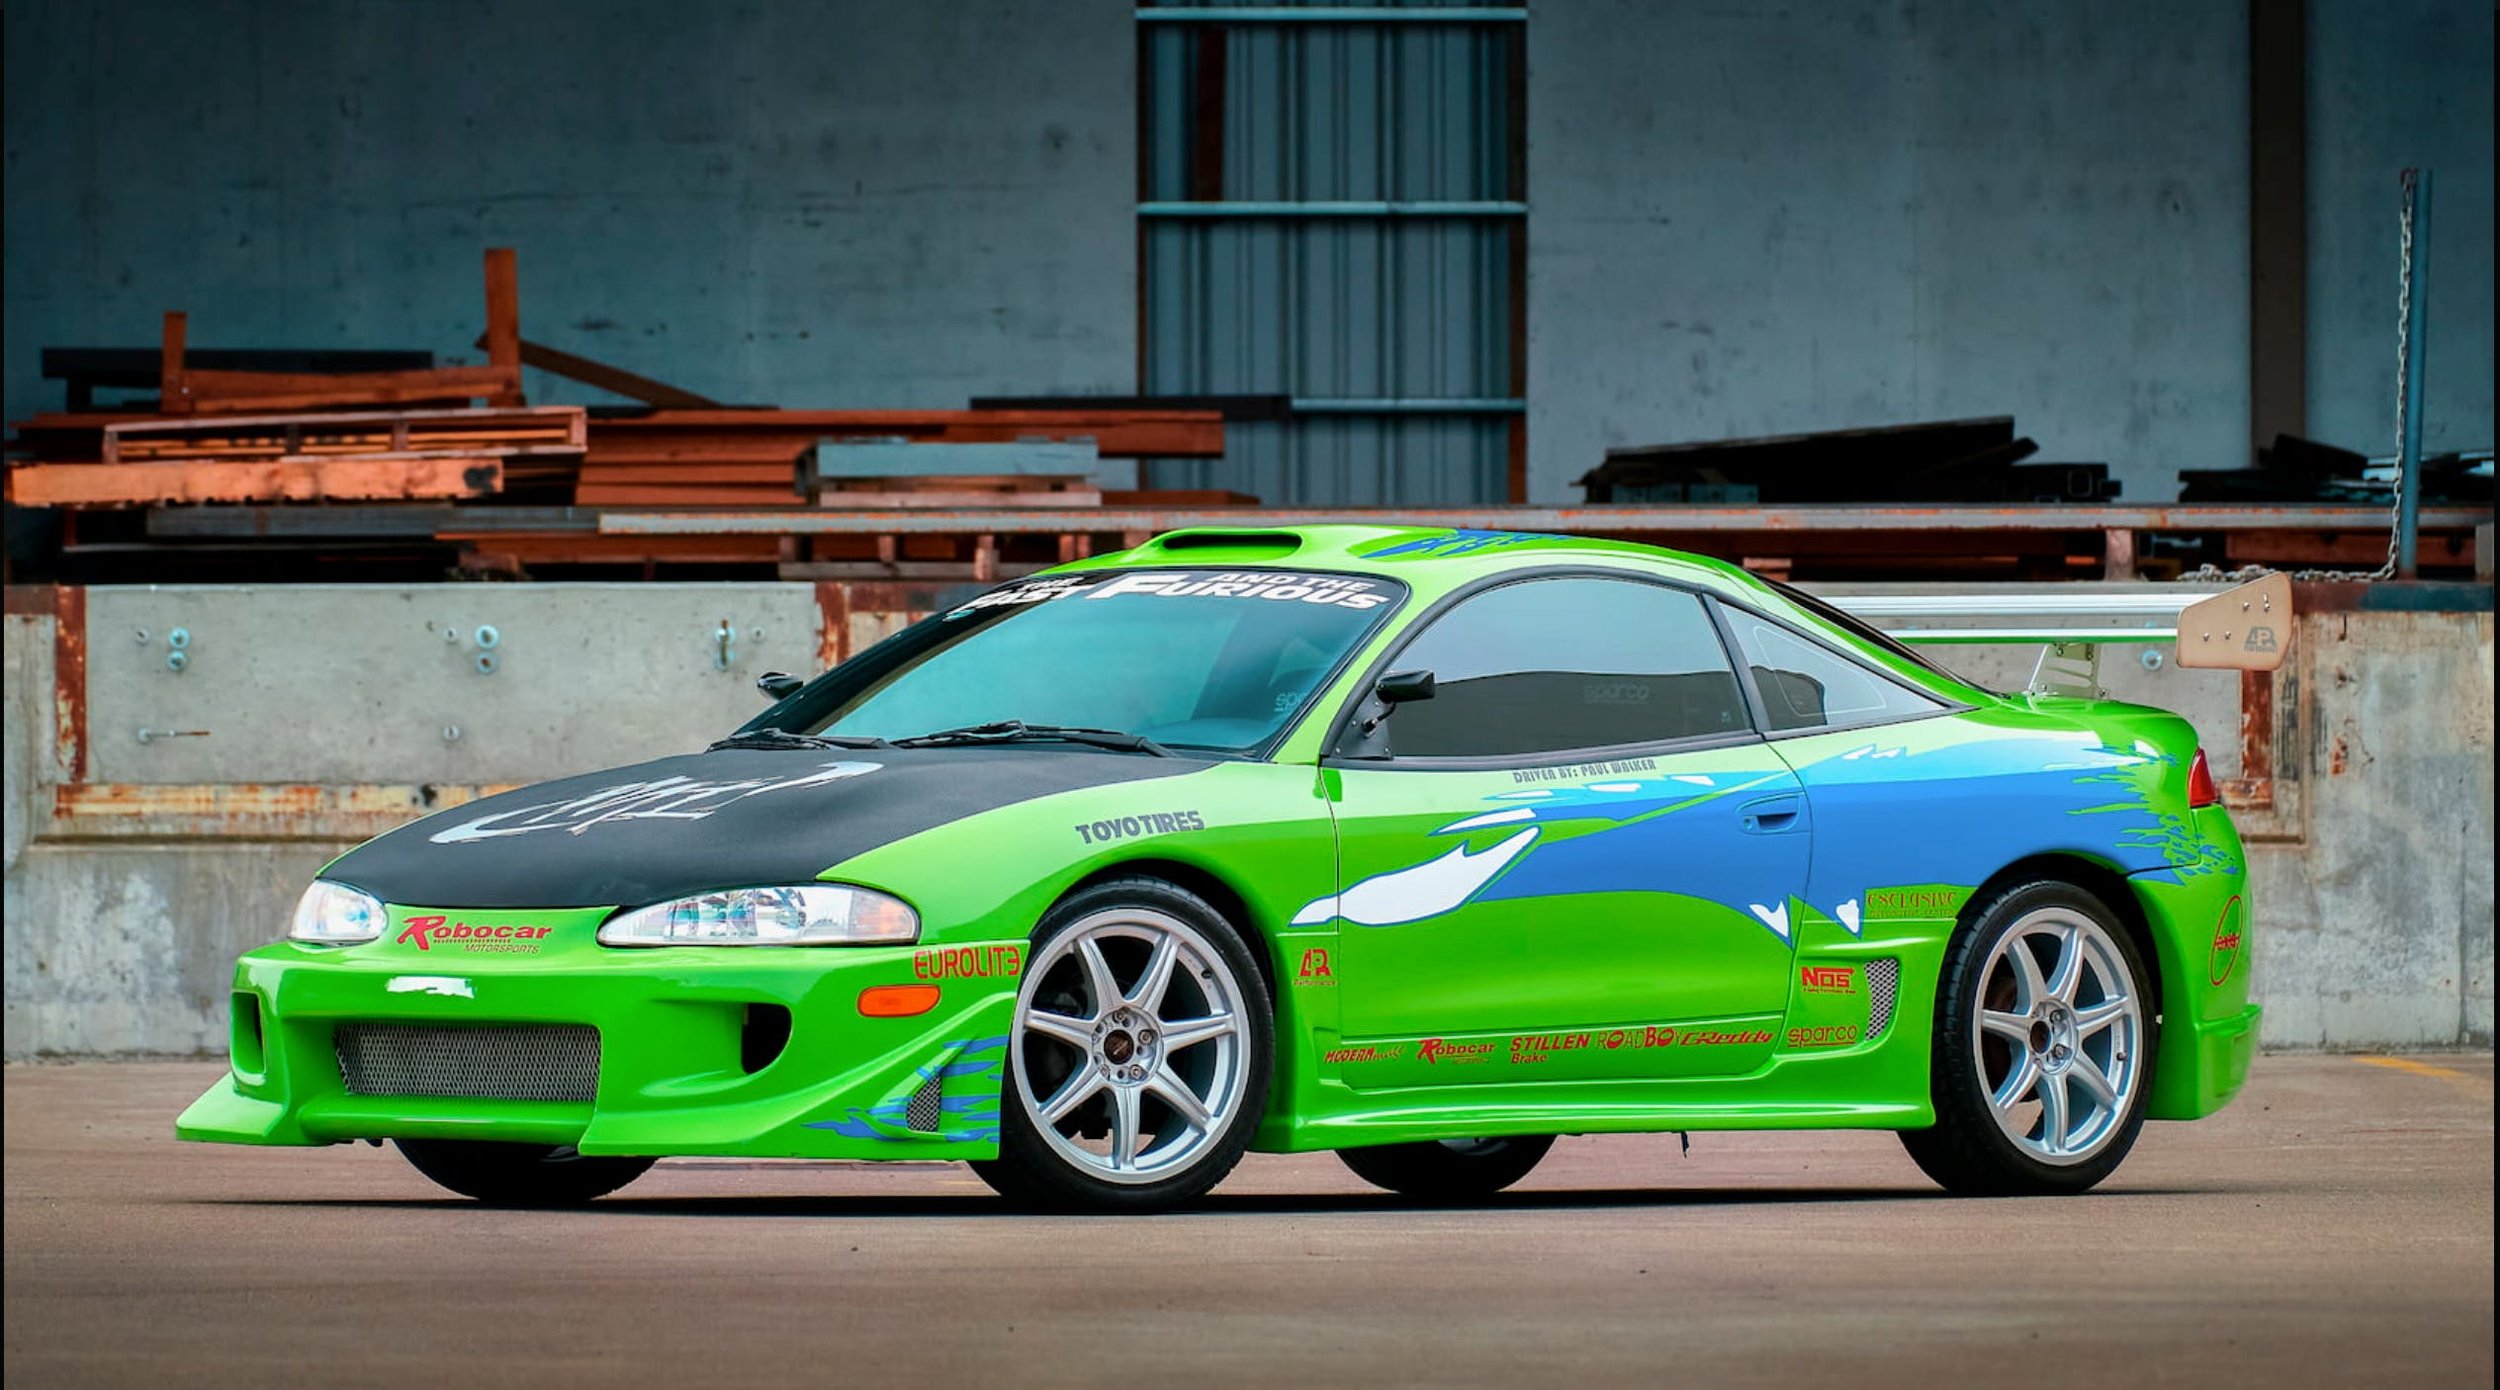 This Mitsubishi Eclipse sold fast for a furious $170,500